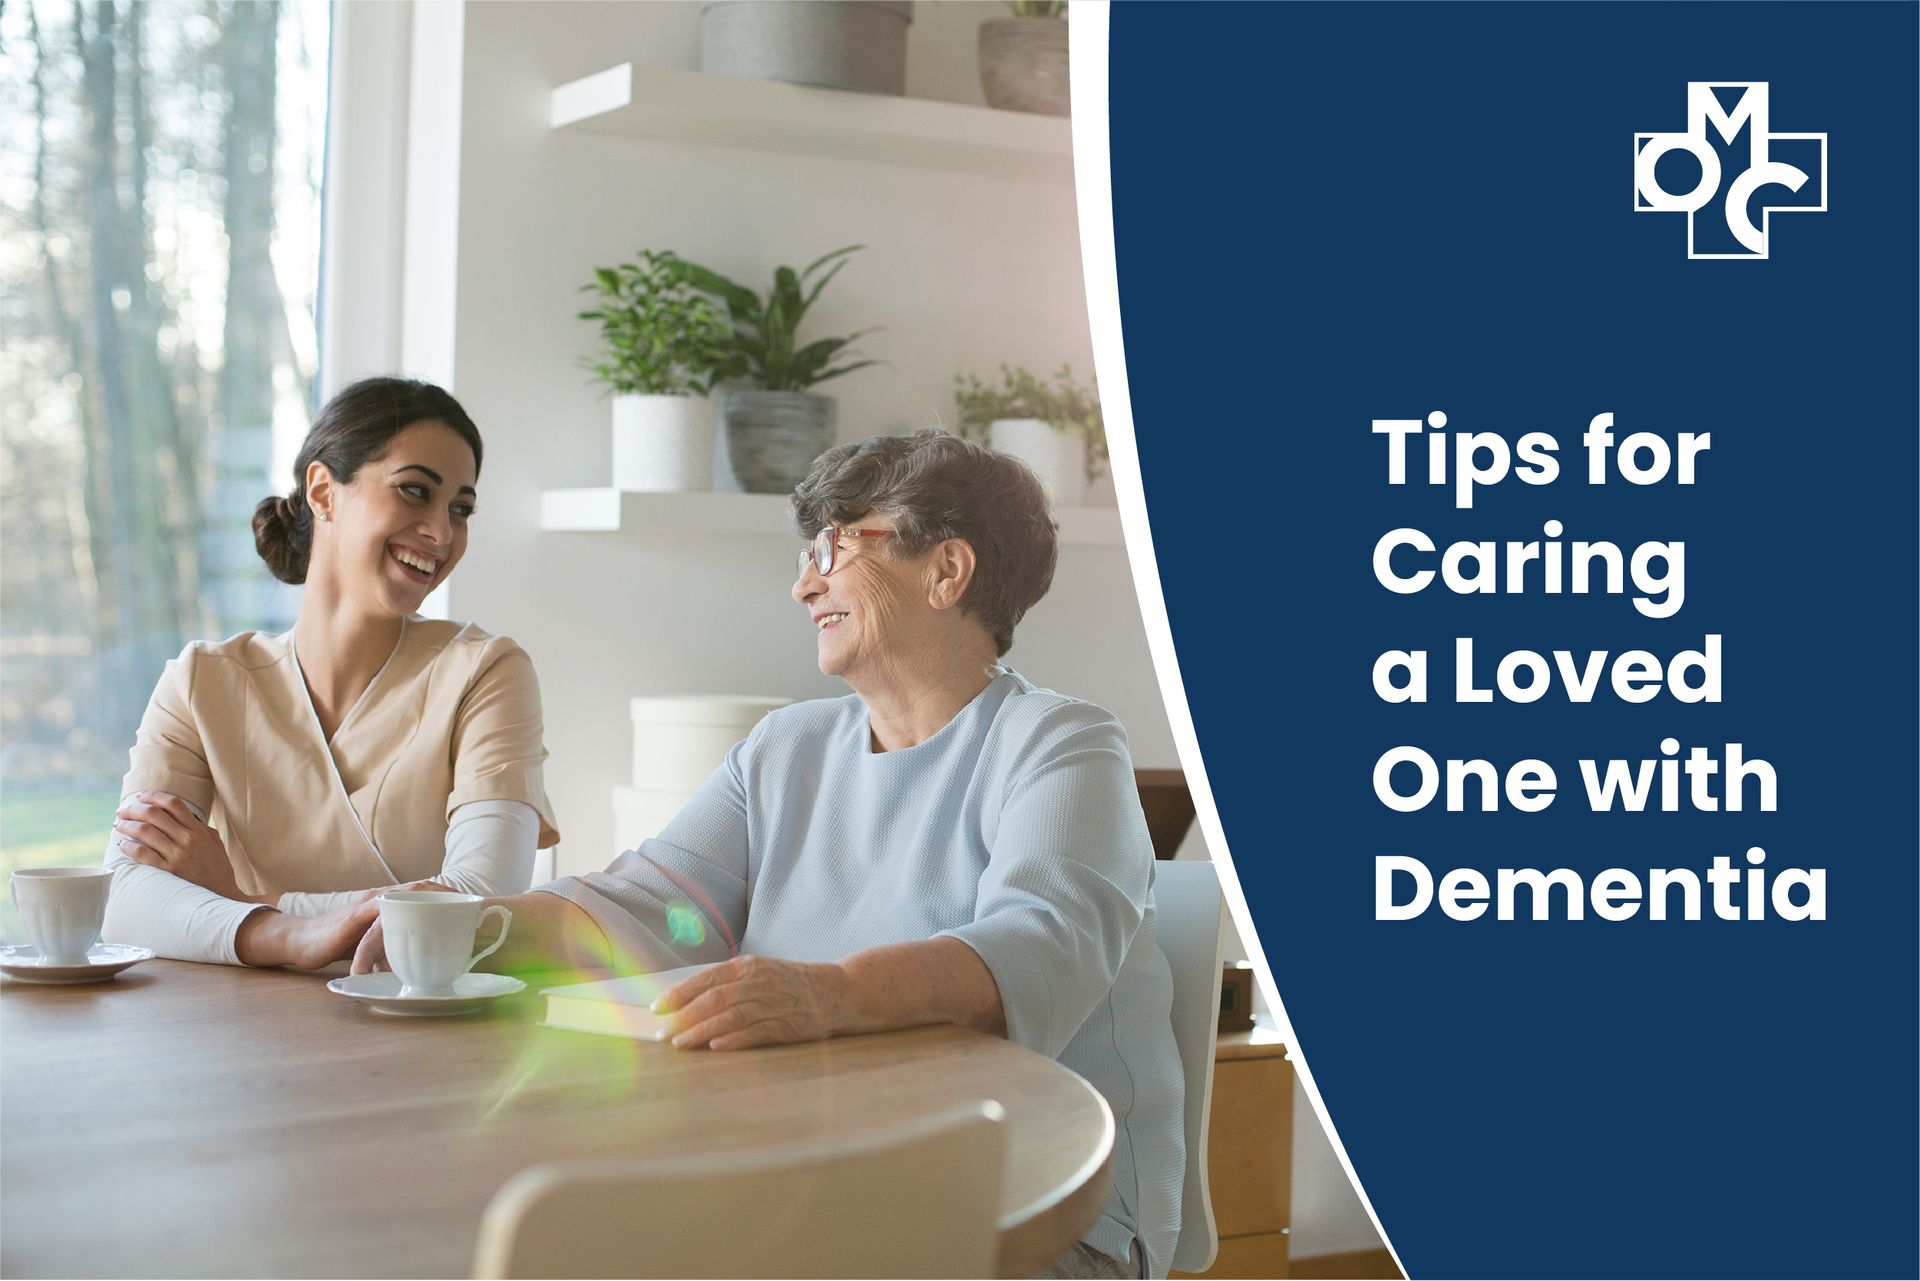 Tips for Caring a Loved One with Dementia